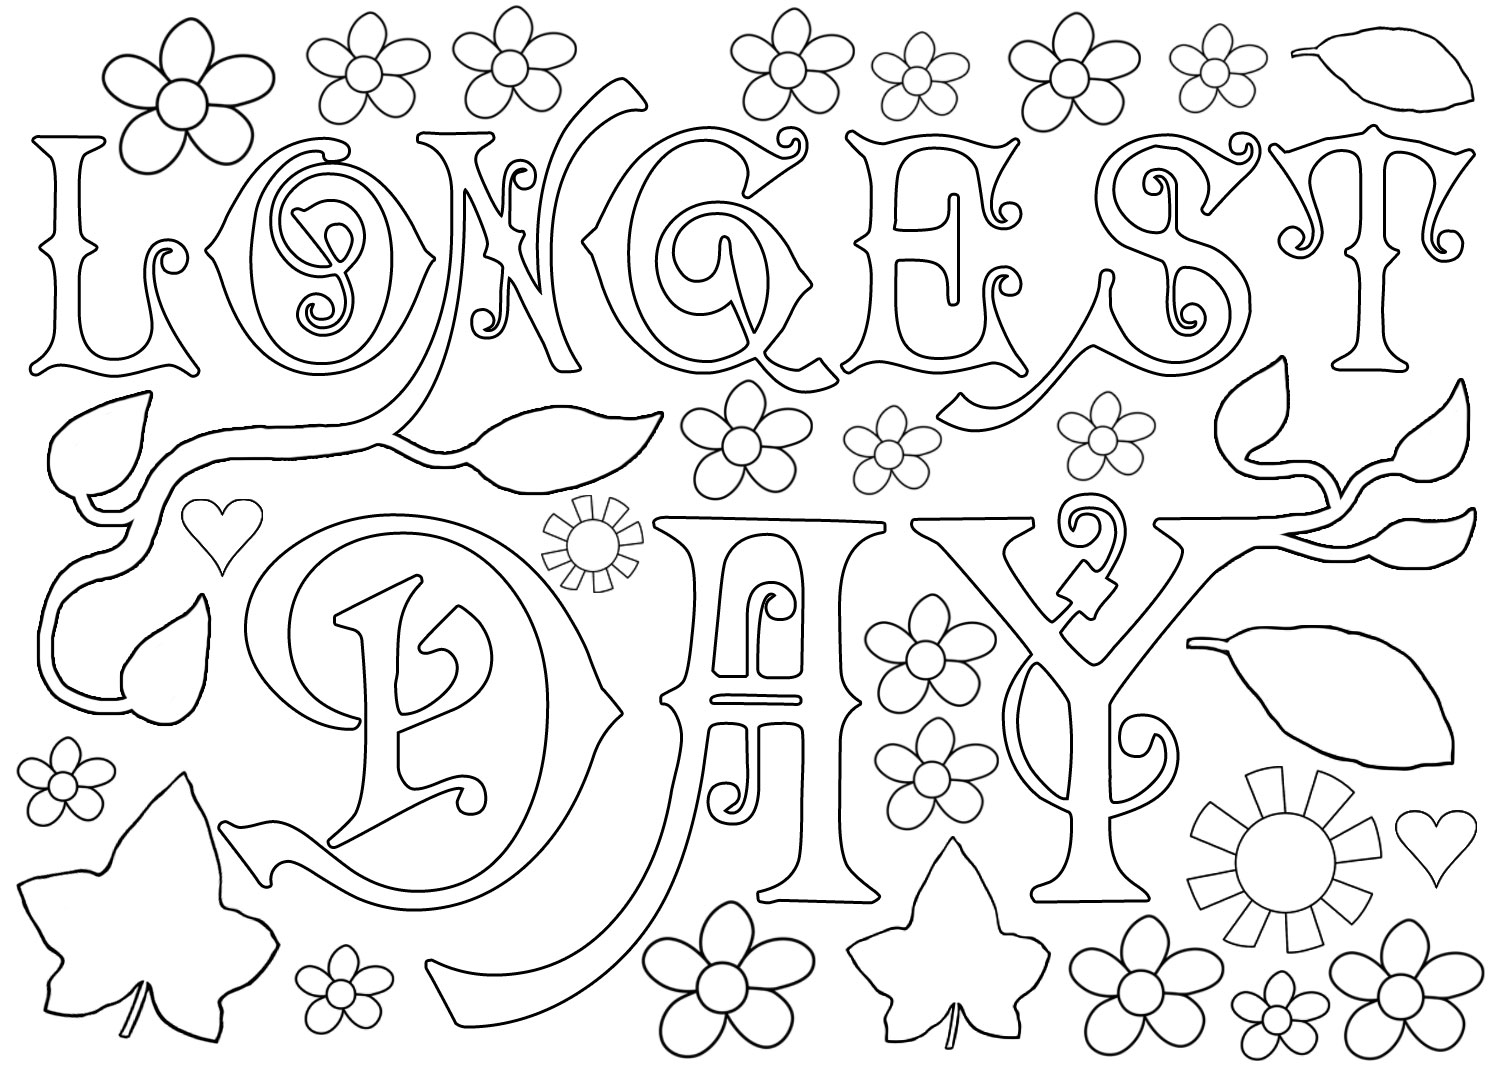 Kids colouring page for the longest day of the year